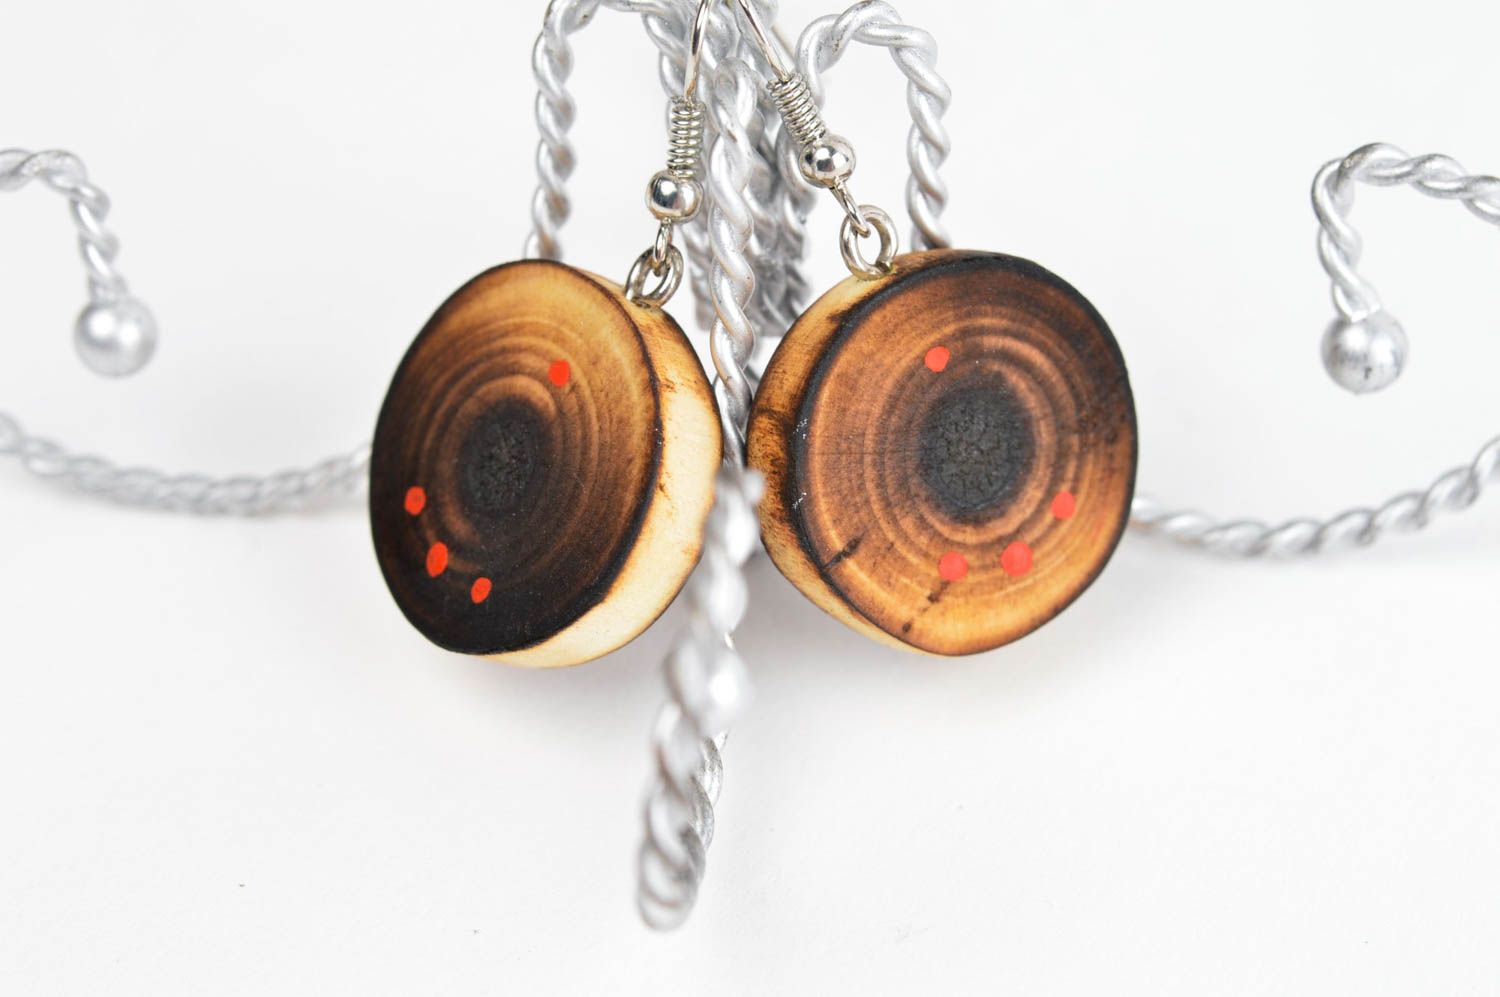 Round handmade wooden earrings artisan jewelry designs accessories for girls photo 1